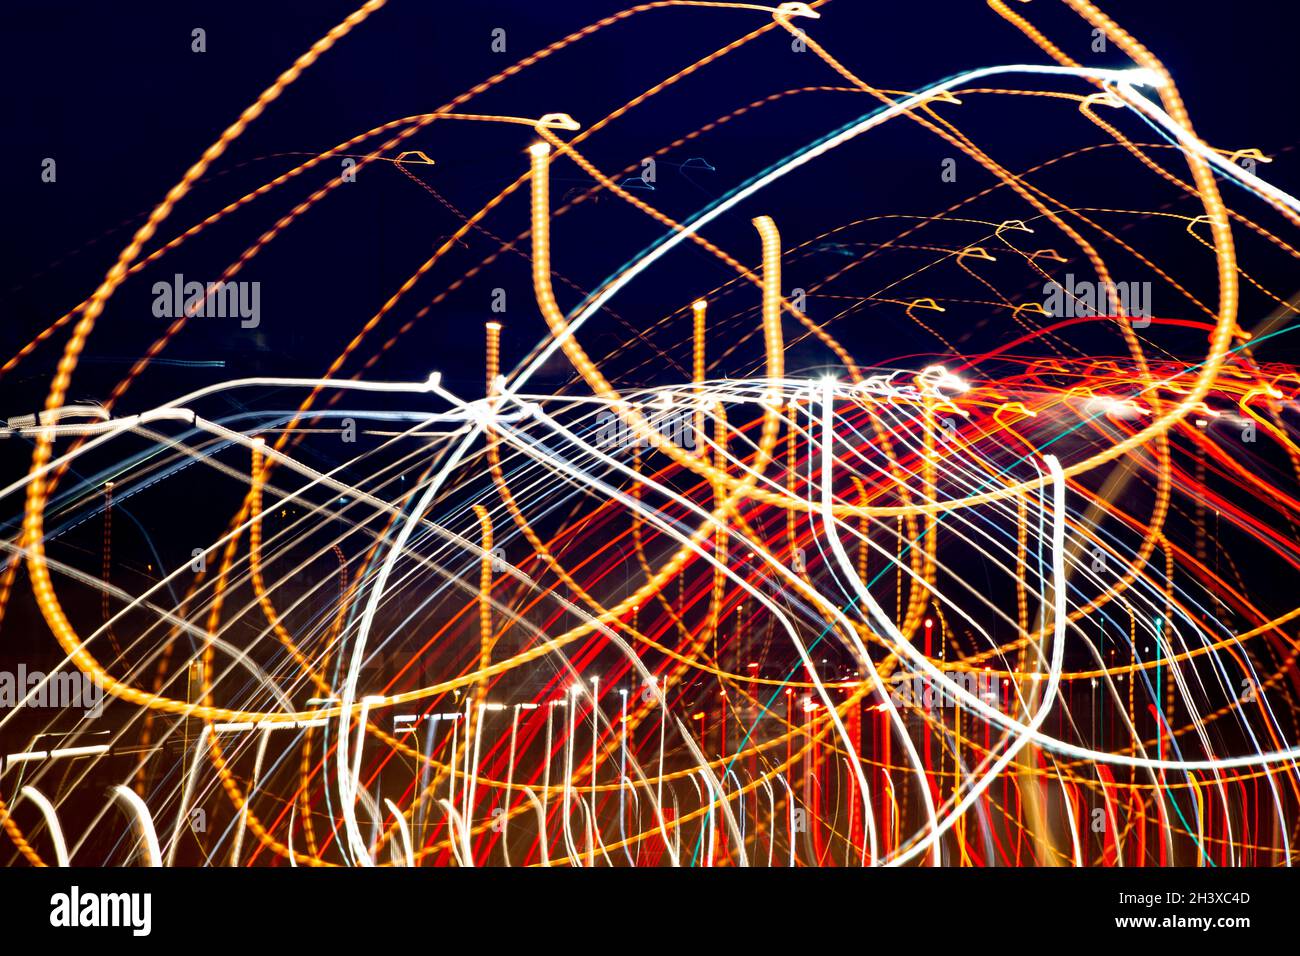 Long exposure photo with the theme of signal clutter, communication clutter, clutter, disorder. Stock Photo